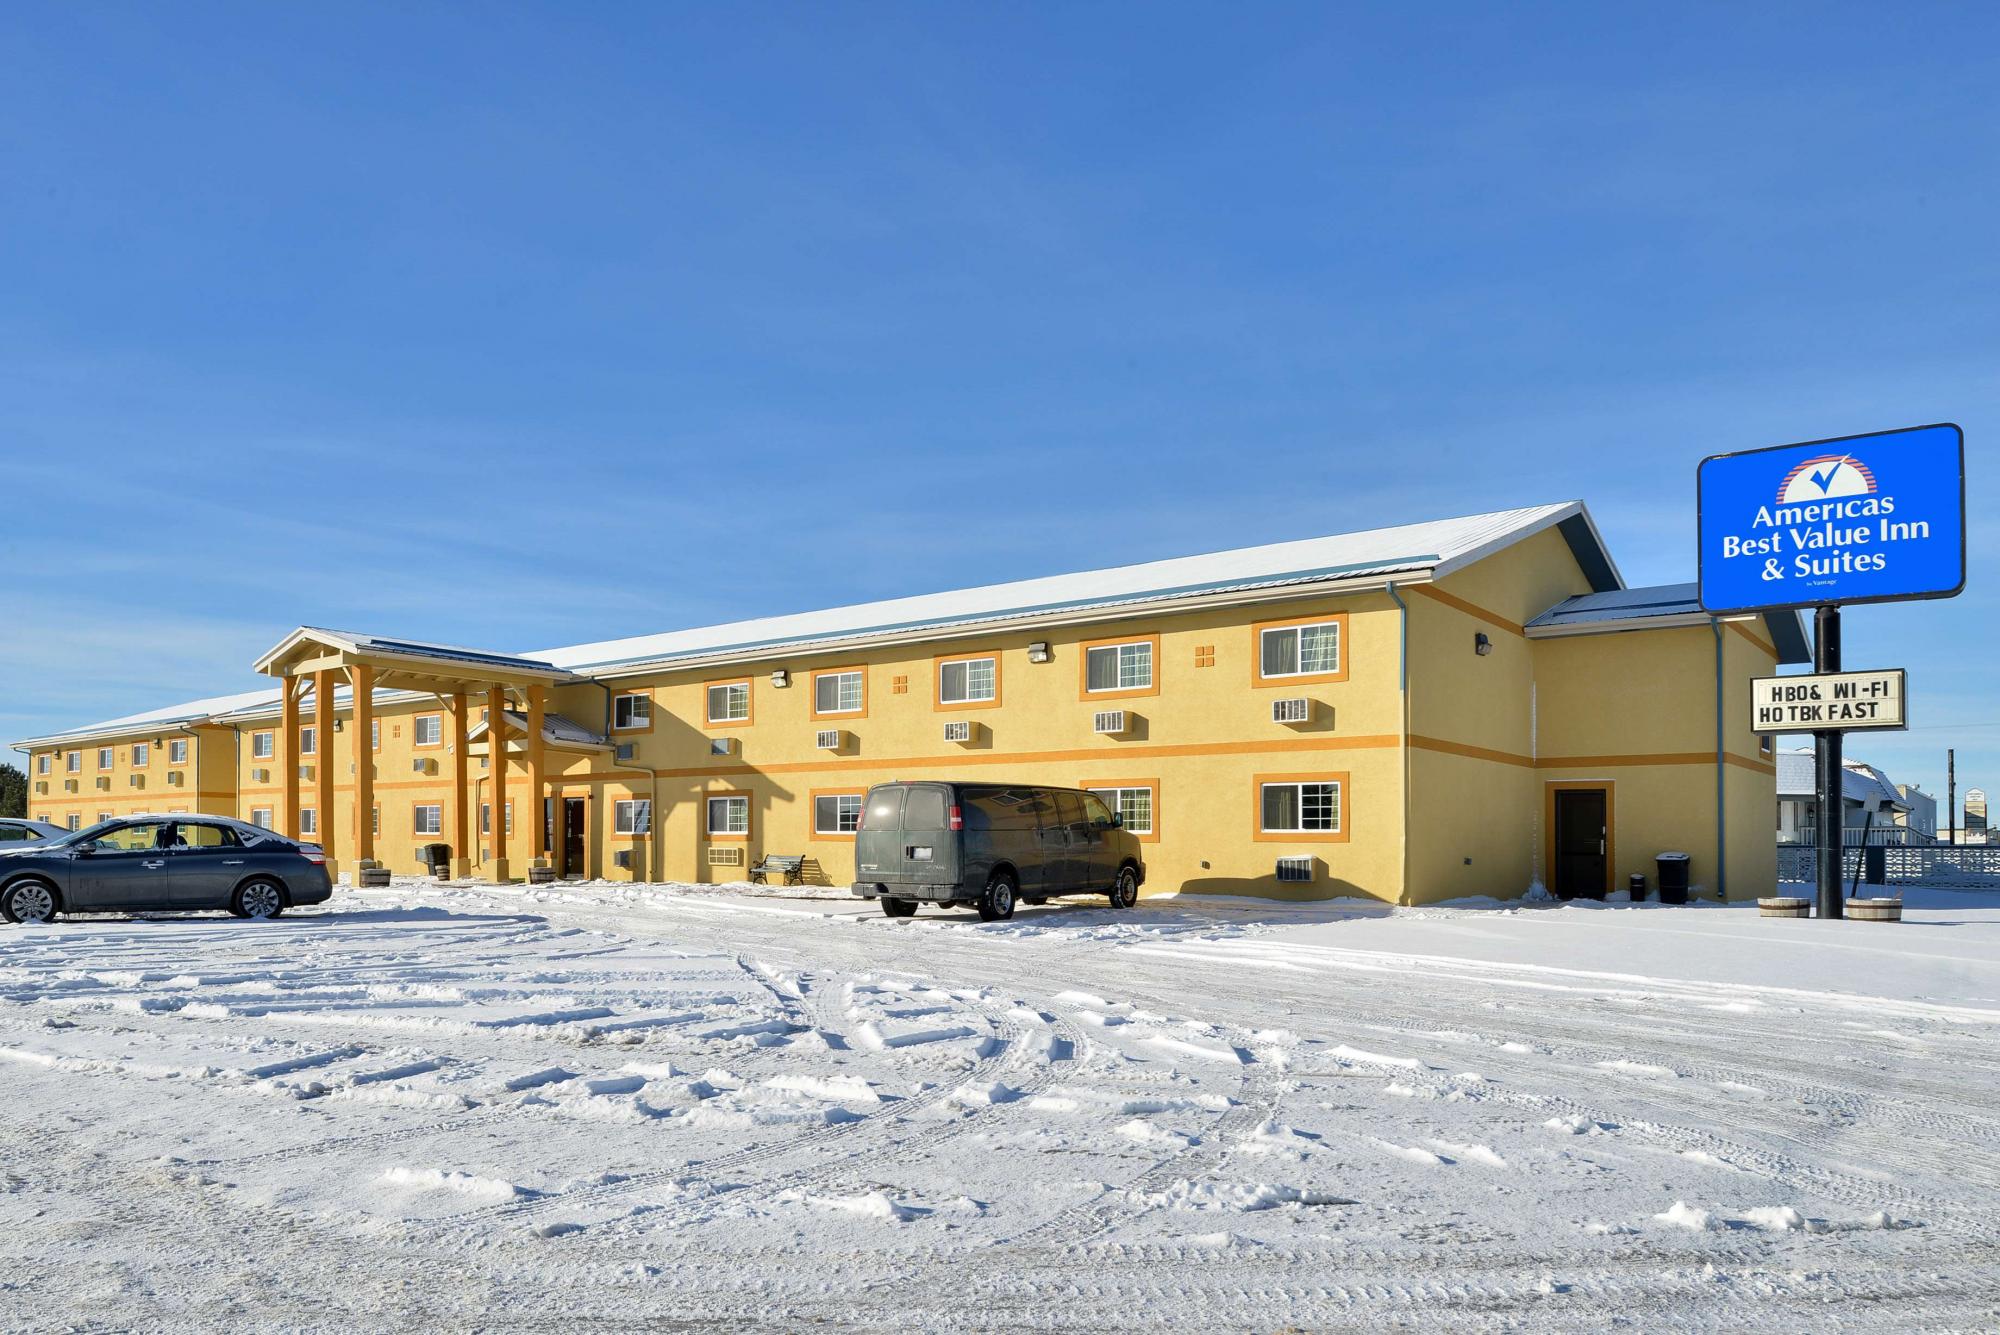 Hotel exterior with snow on the ground